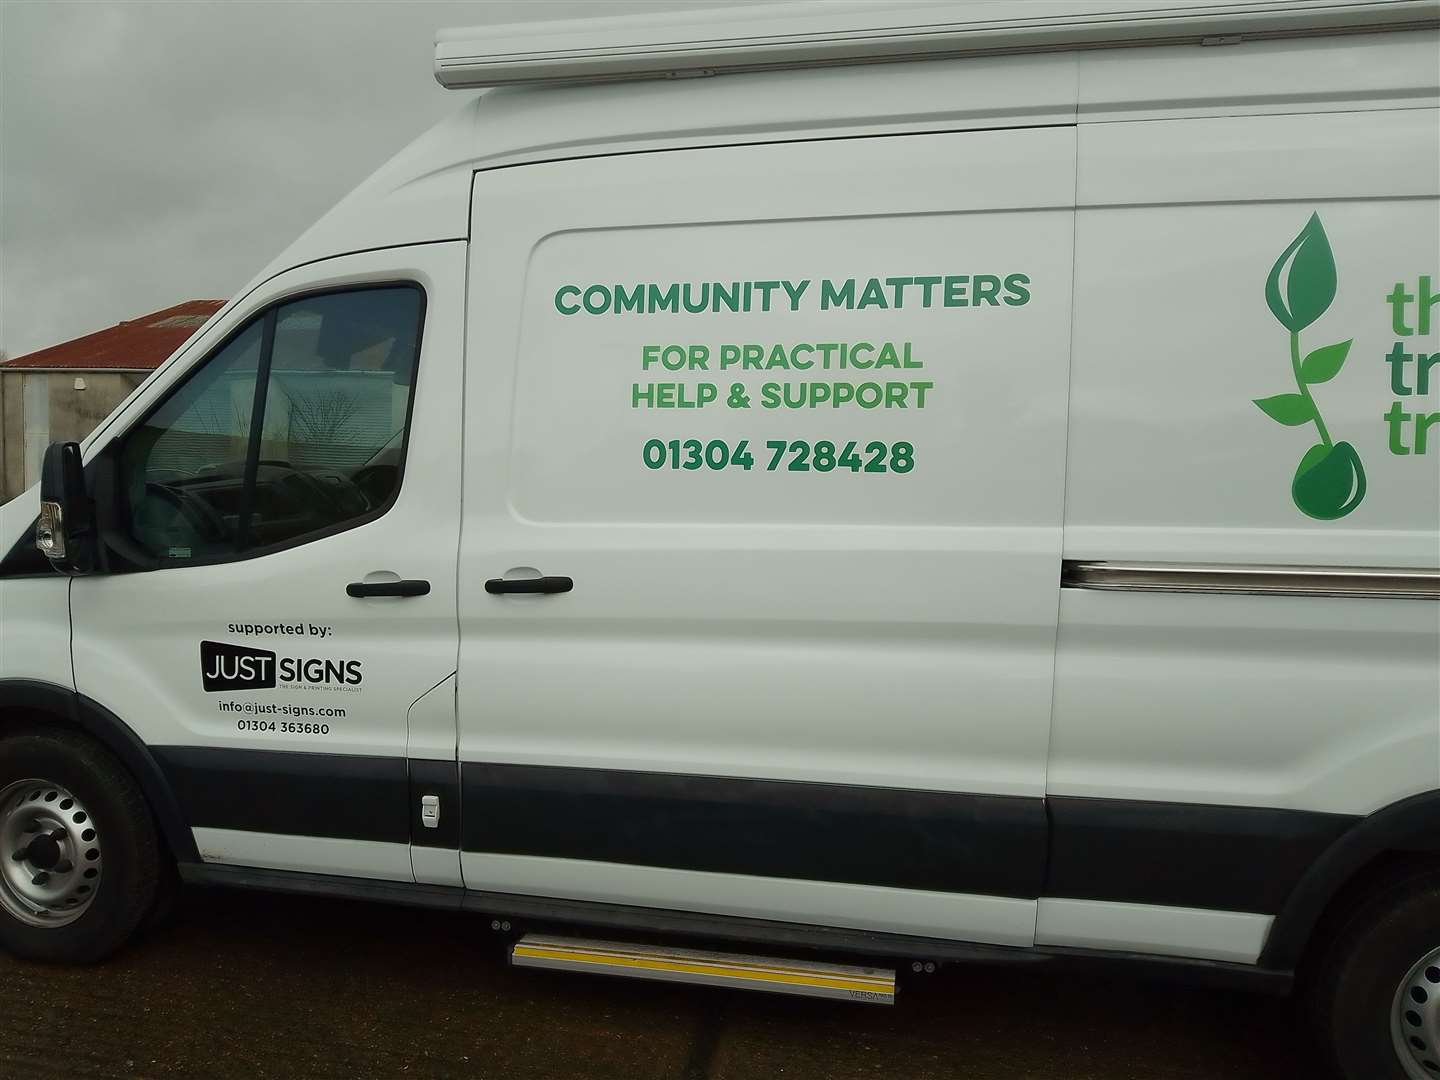 The new Community Matters van belonging to Deal Area Foodbank launches on March 1